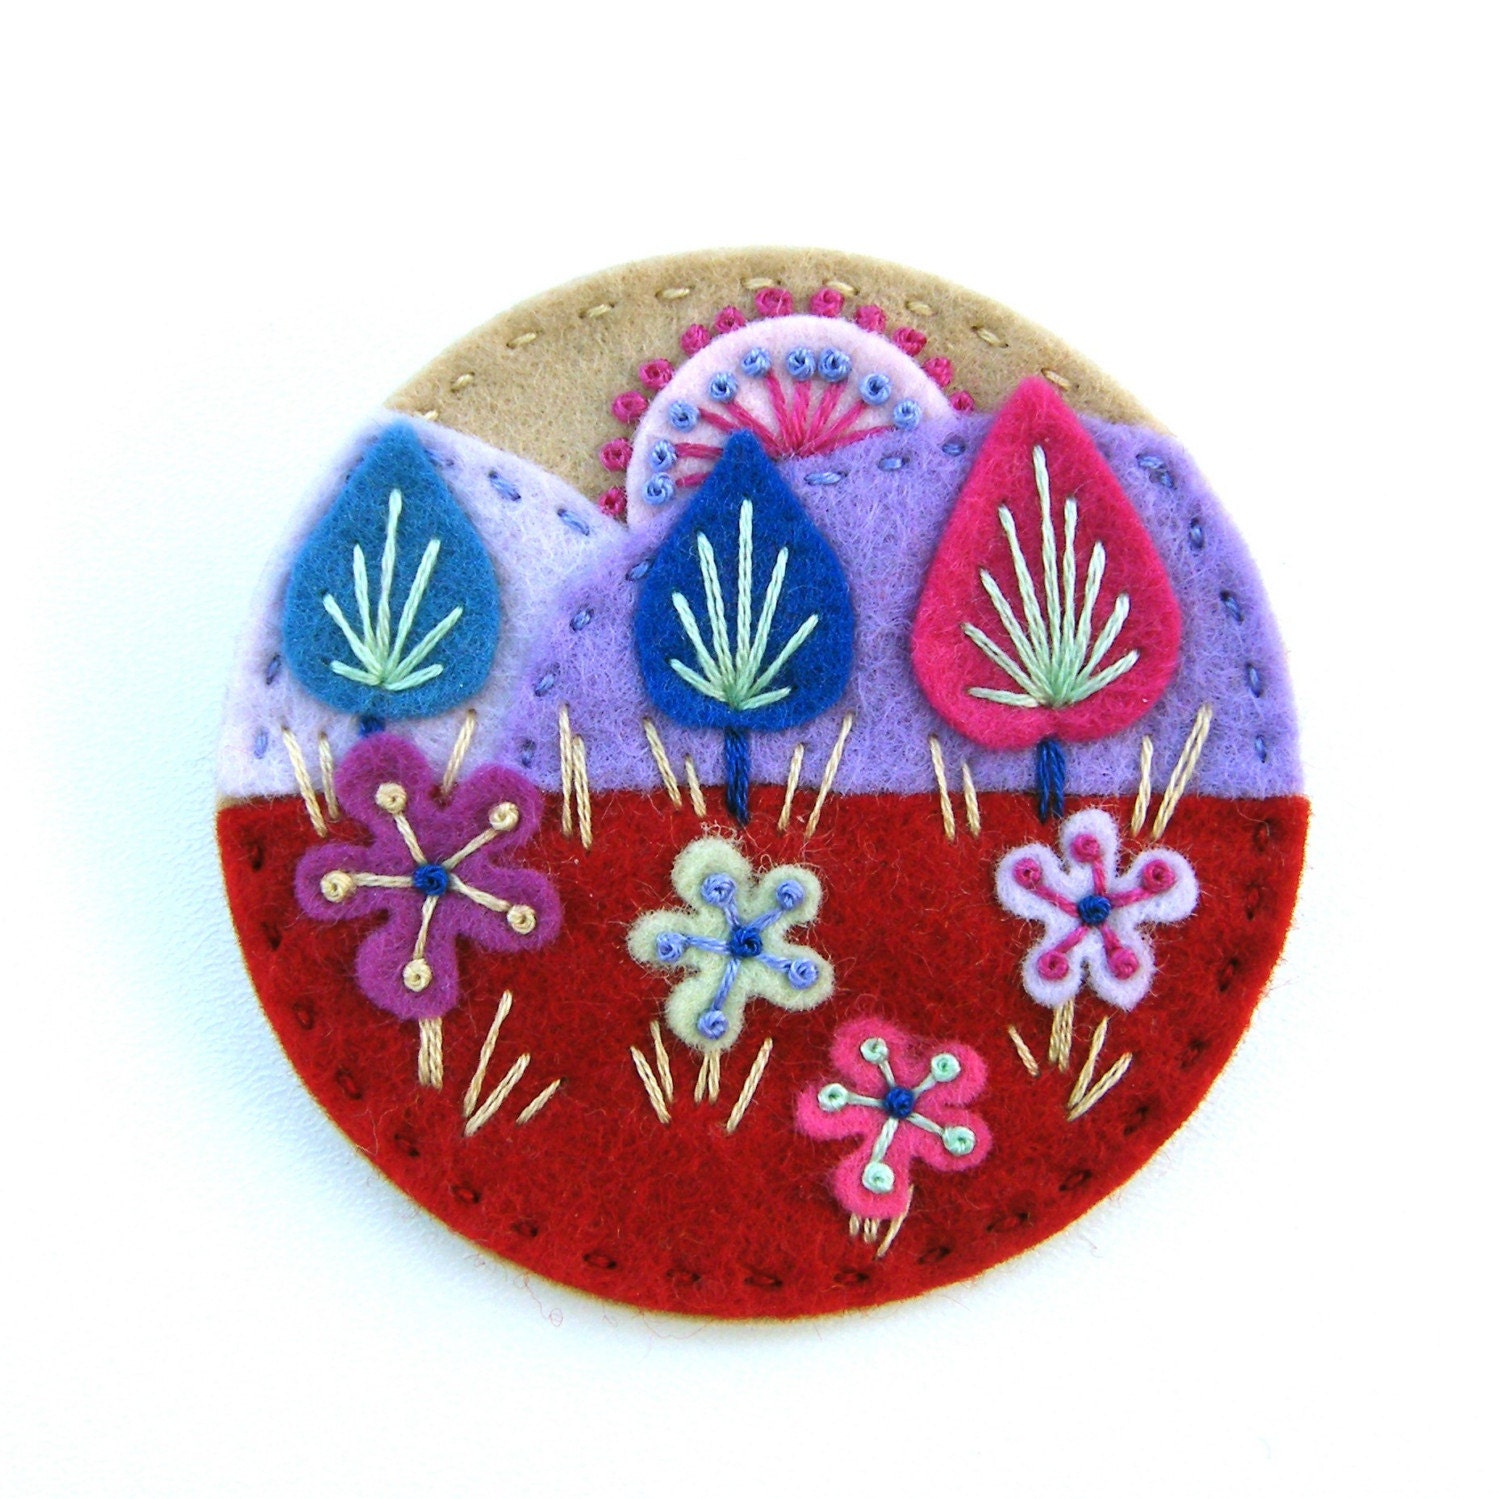 TREESCAPE FELT BROOCH PIN WITH FREEFORM EMBROIDERY